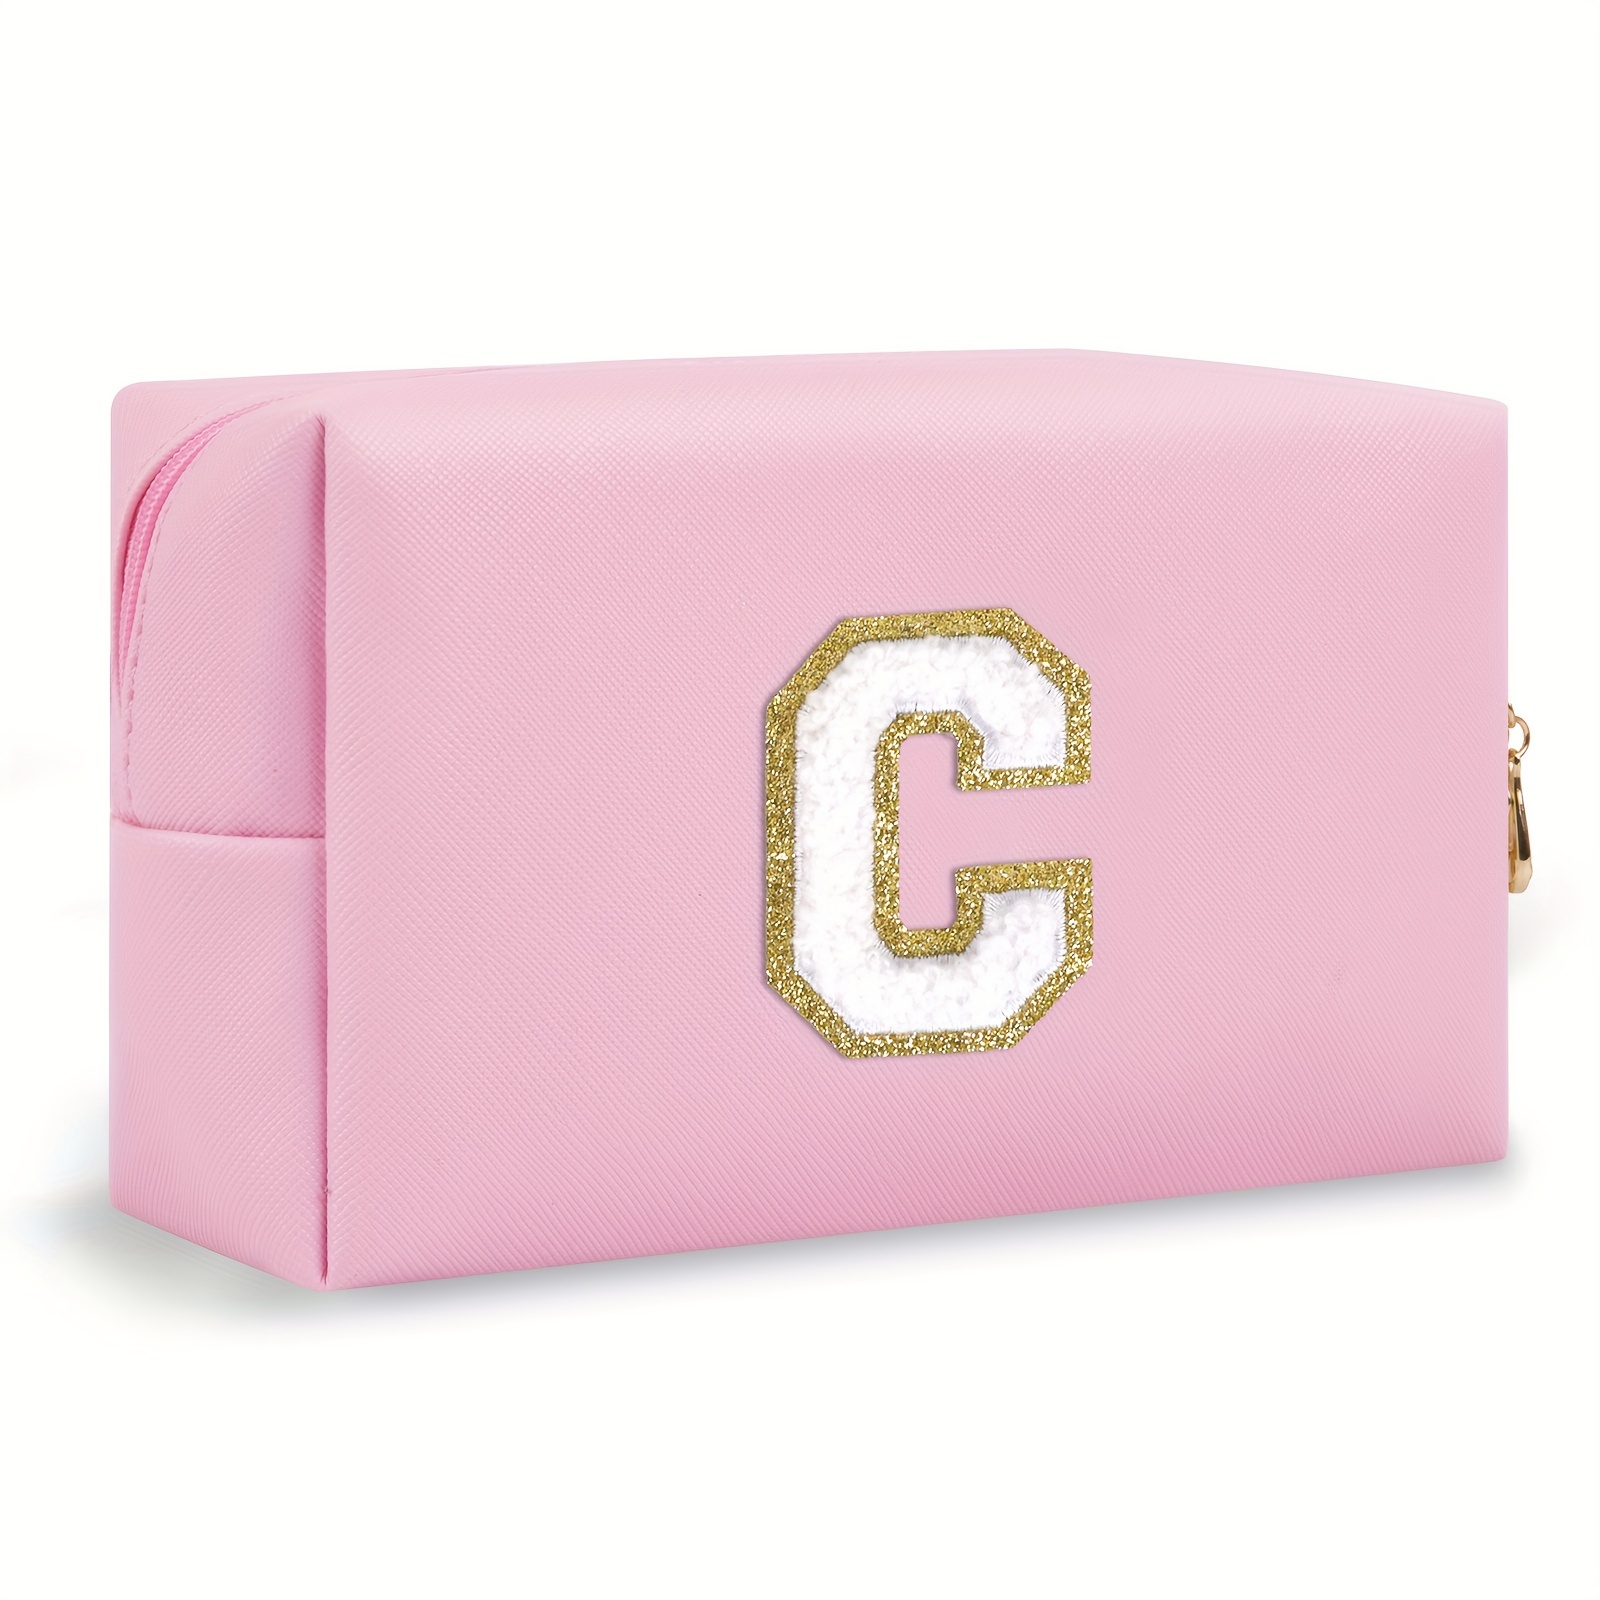 New w/Box CHANEL Pink Canvas Cosmetic Pouch / Make-Up Travel Bag +